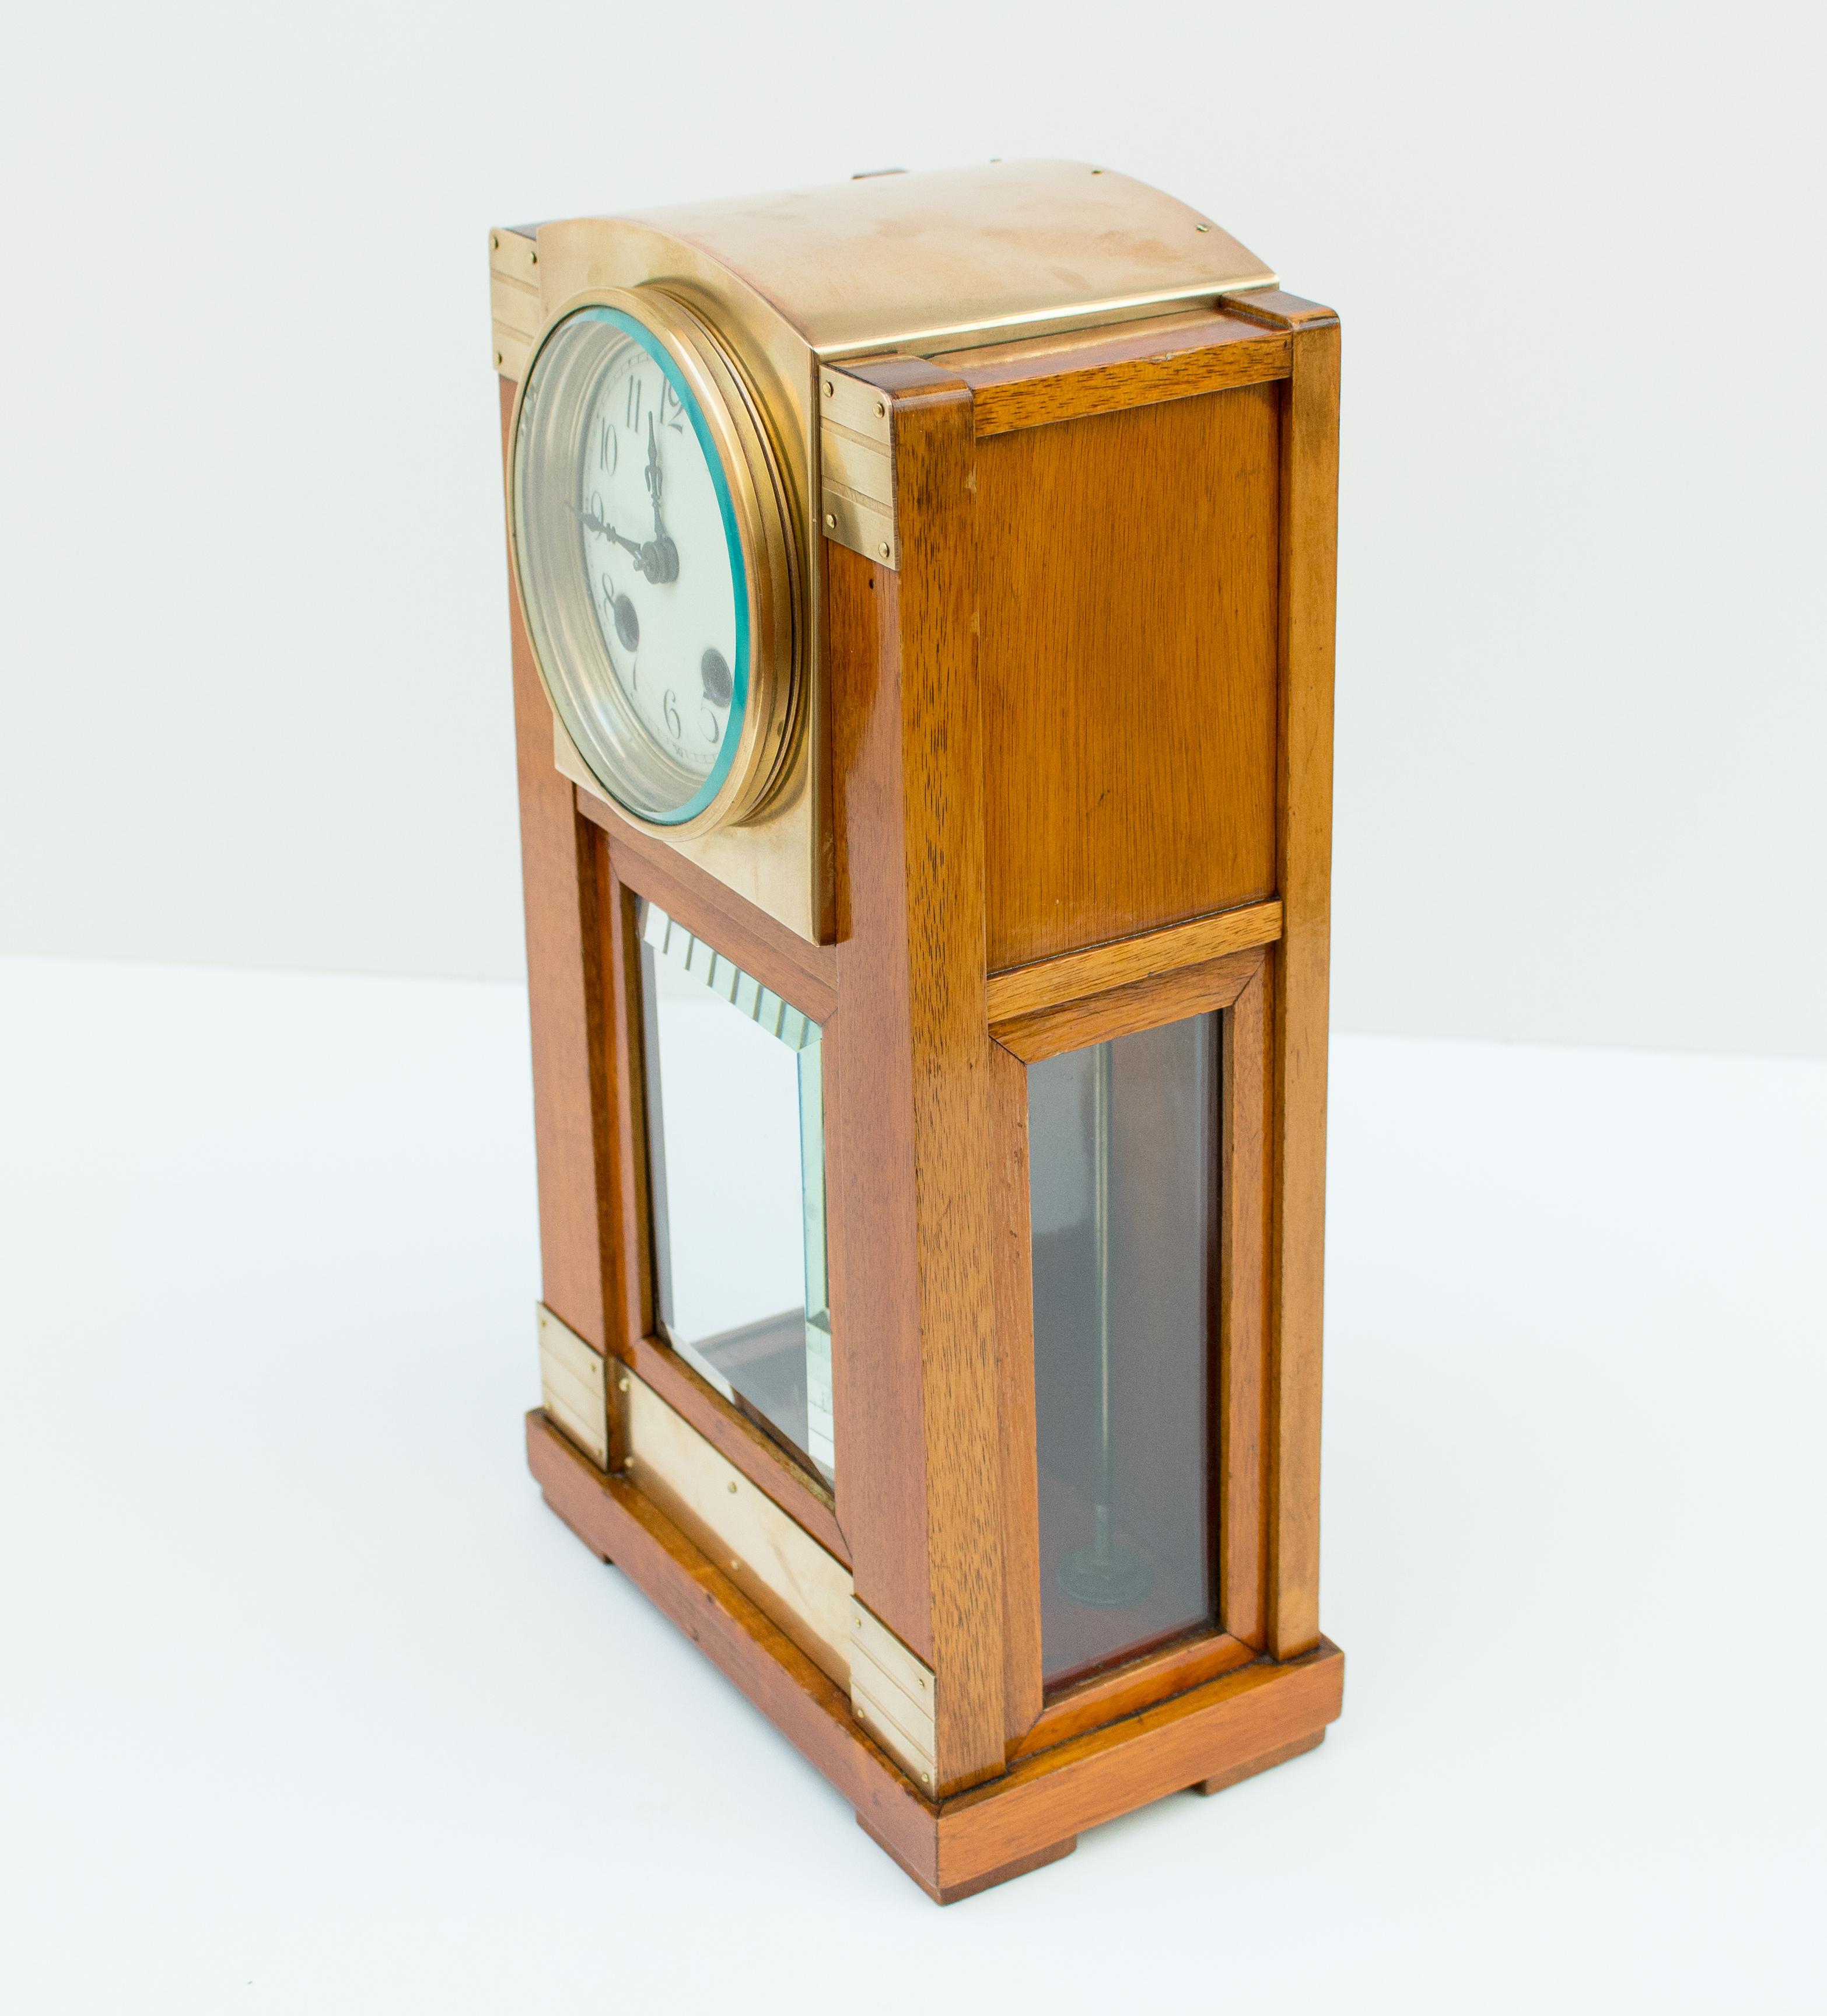 Beautiful Art Nouveau table / chimney clock from the Art Nouveau period, circa 1900. The watch case is made of mahogany wood with brass fittings. 

The clock is very well restored and has been overhauled by a master watchmaker. 

The movement was